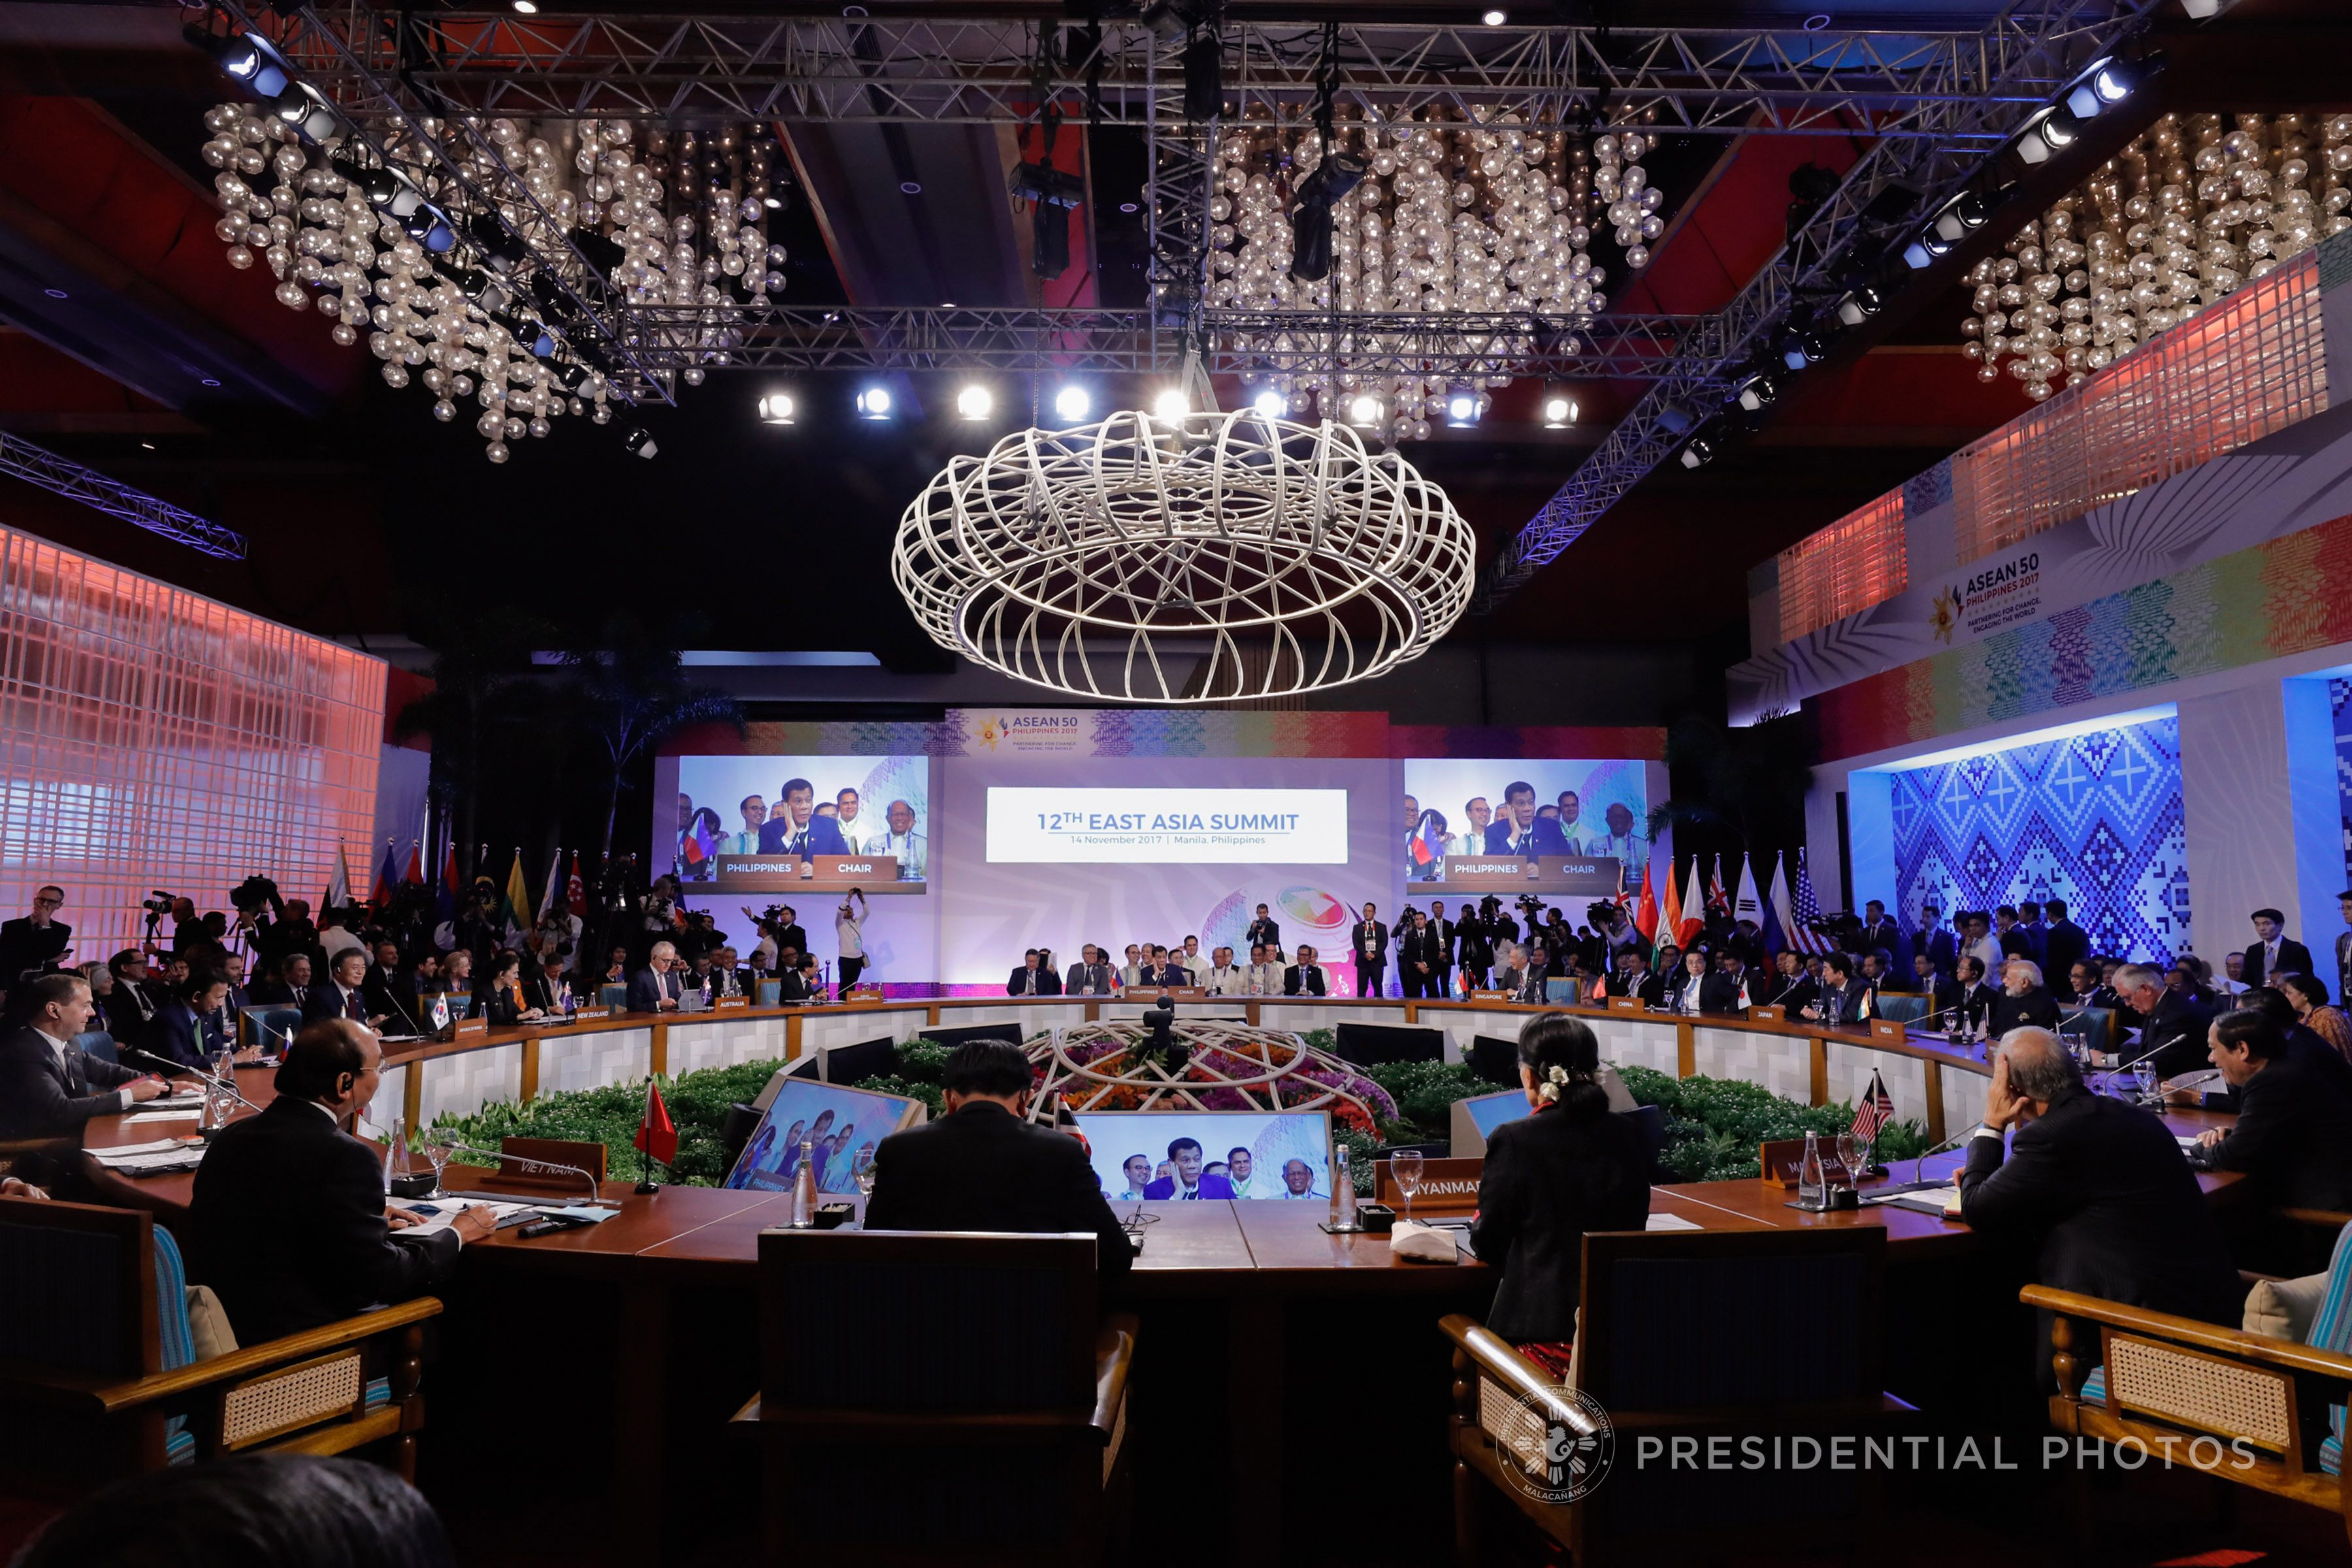 WORLD STAGE. Leaders gather for the East Asia Summit. Malacañang photo  